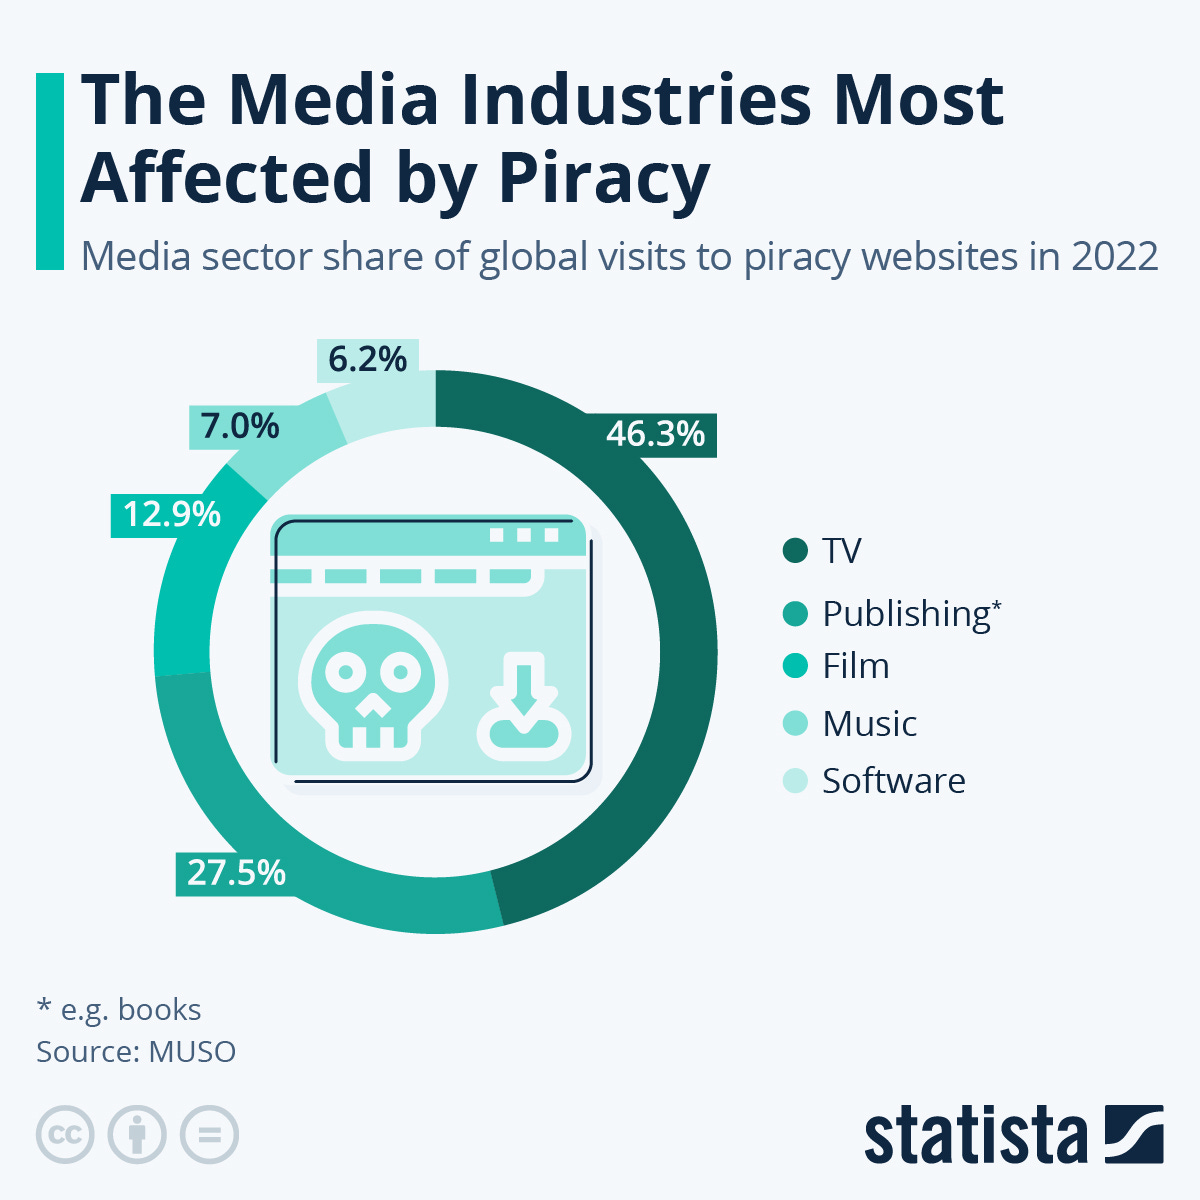 Share of global visits to piracy websites in 2022 is as follows: TV, 46.3 per cent; publishing (books), 27.5 per cent; film (12.9 per cent), music (7 per cent), and software (6.2 per cent).